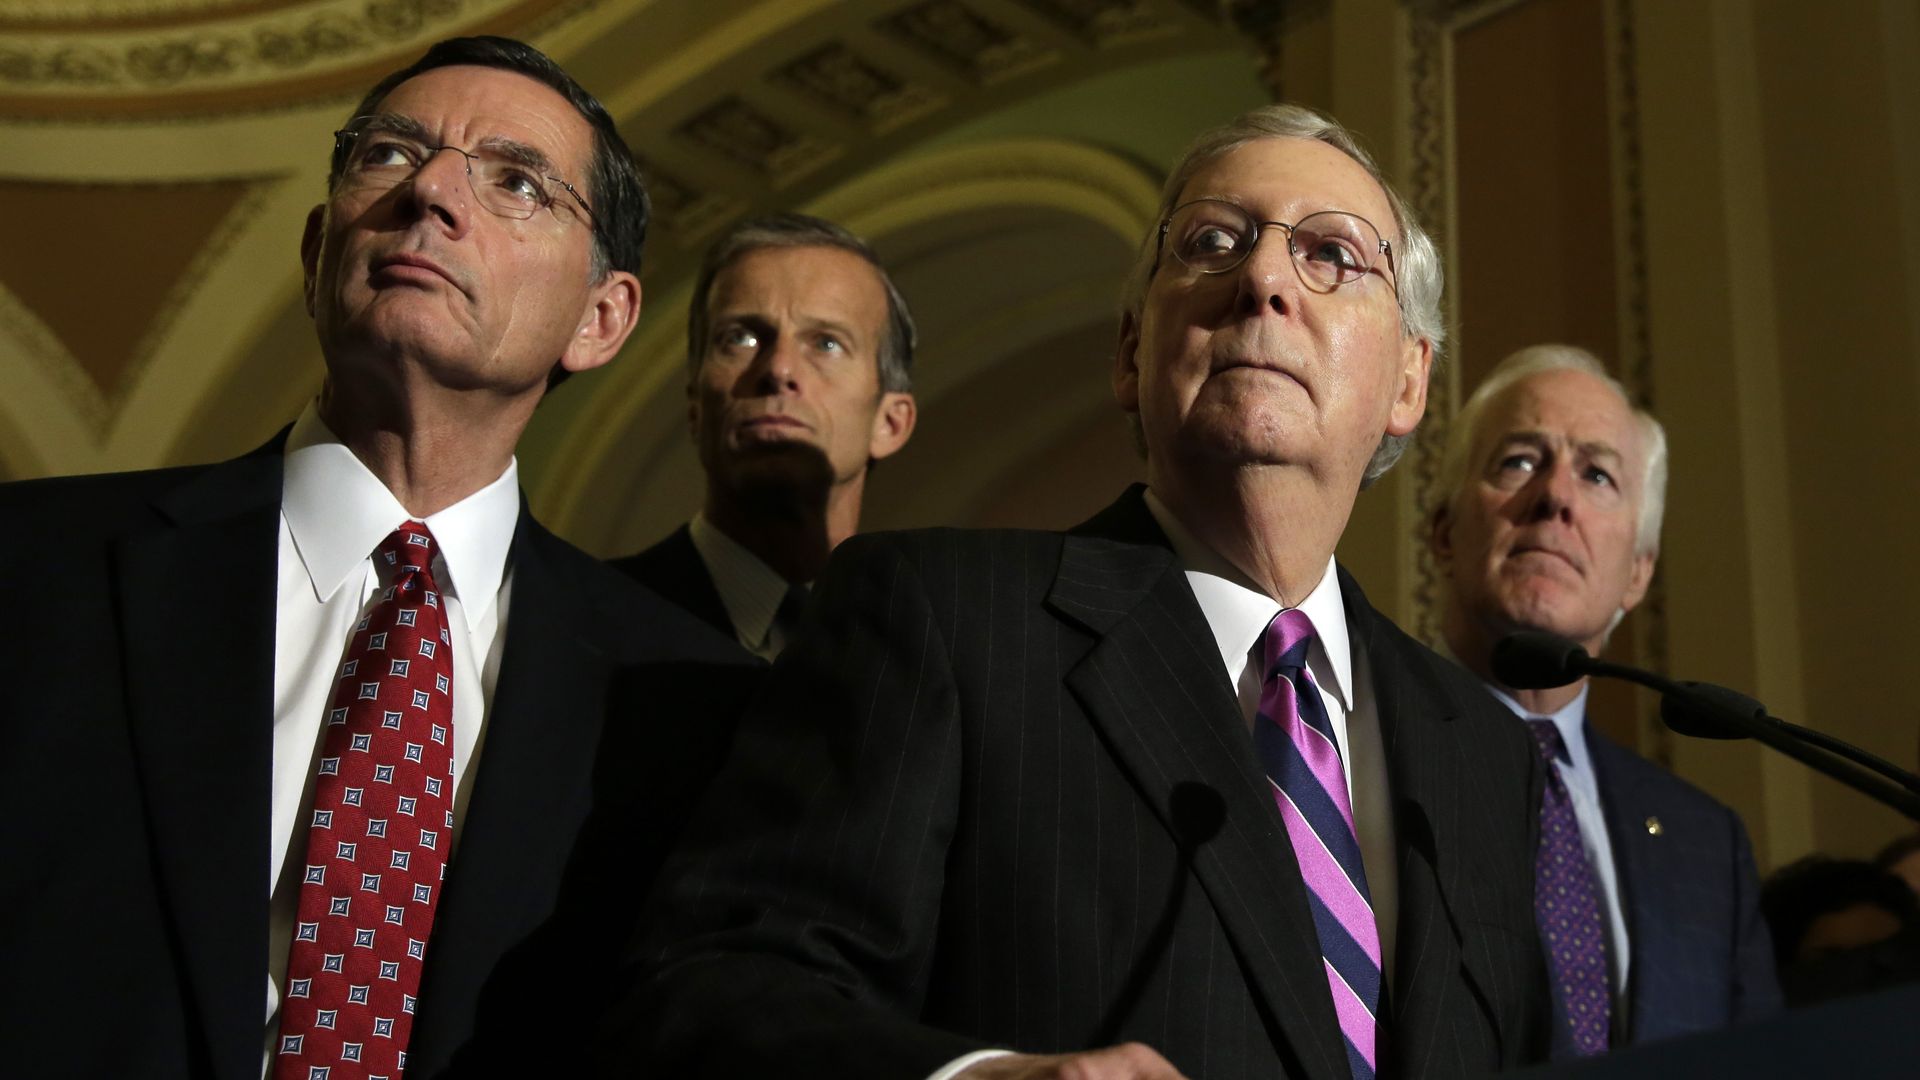 Senate Majority Leader Mitch McConnell (R-KY) (C) listens to questions from the media as Senators John Barrasso(L),R-PA, John Thune(2nd-L), R-SD, and John Cornyn(R), R-TX look on after a policy luncheon on Capitol Hill 